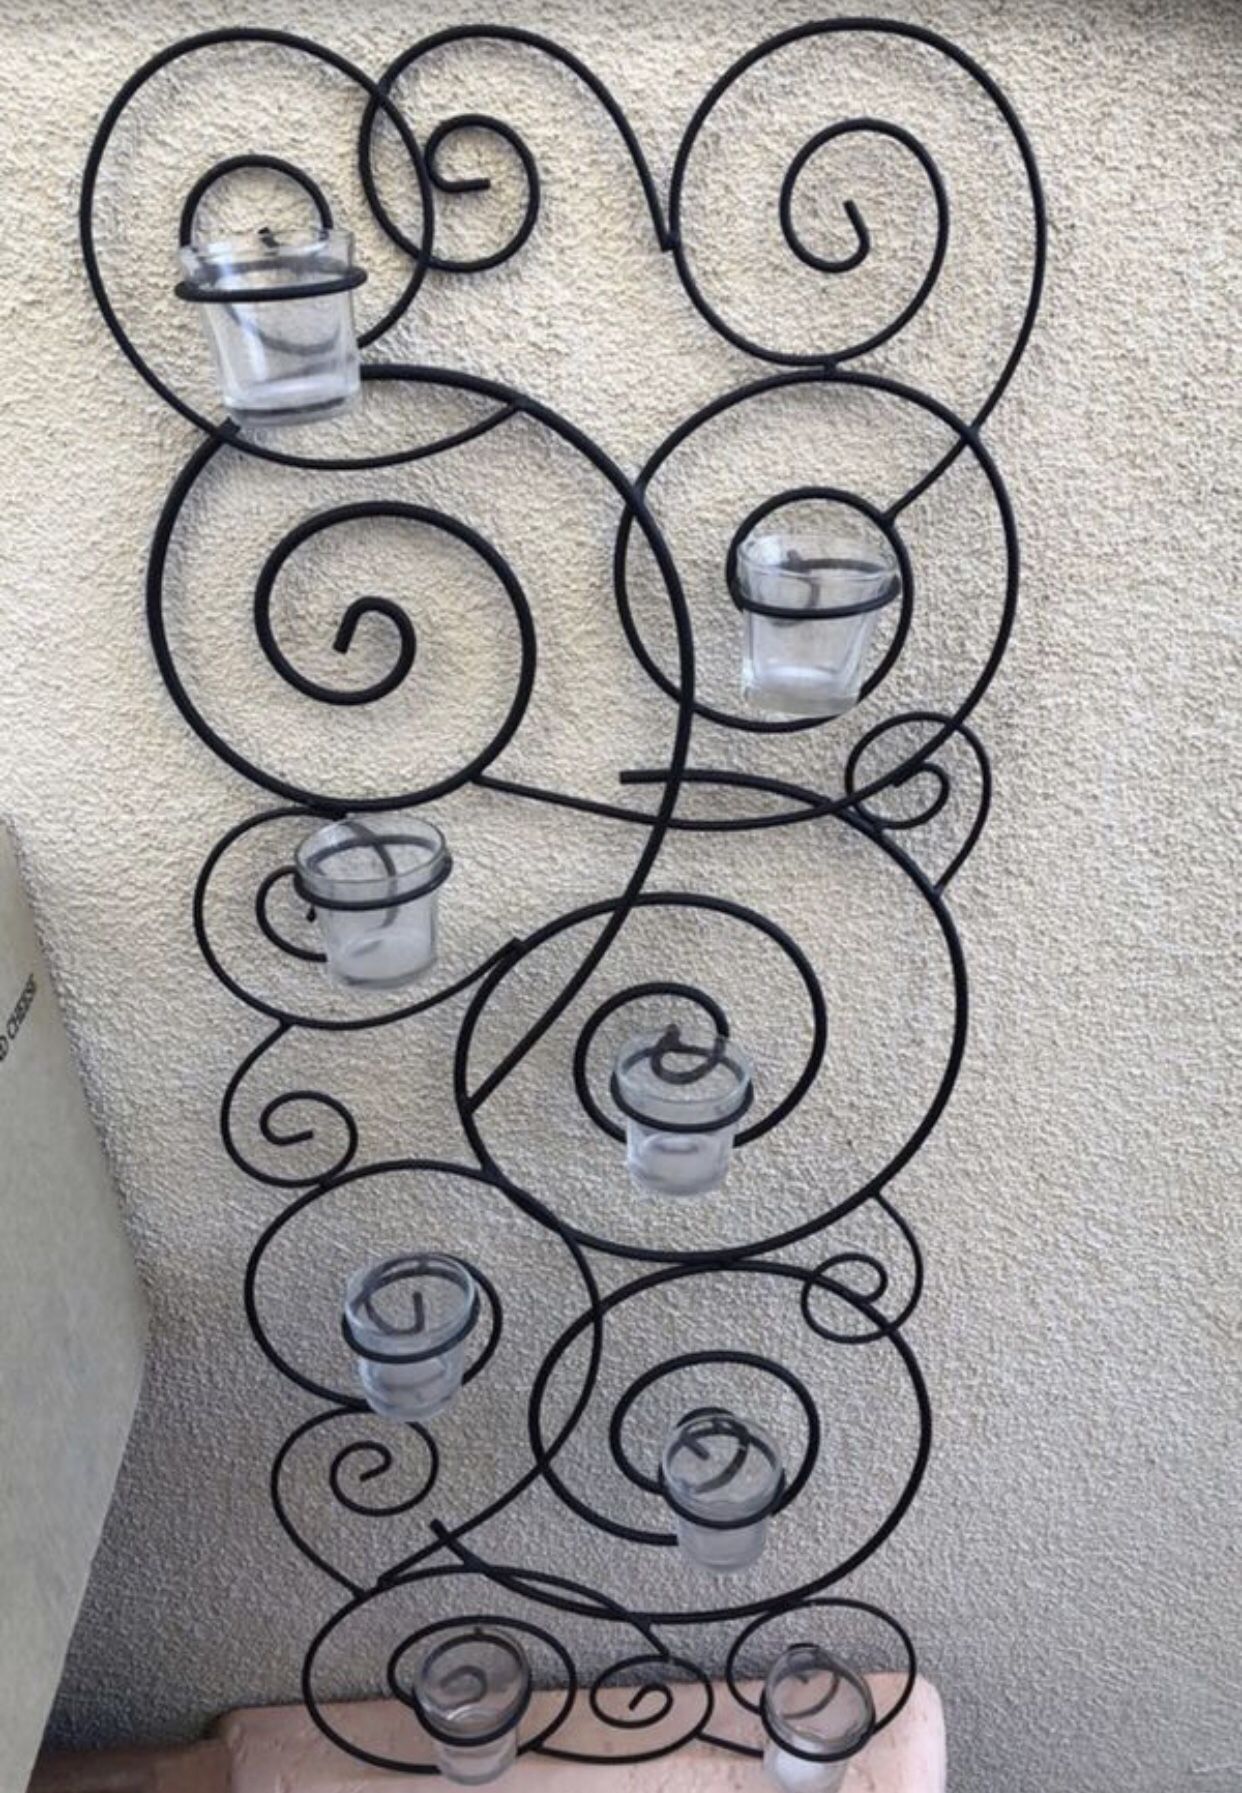 Black iron hanger, with 8 glasses candle holders . Still brand new. Size 35,5” T X 14” W. Look new. Price $28 only.